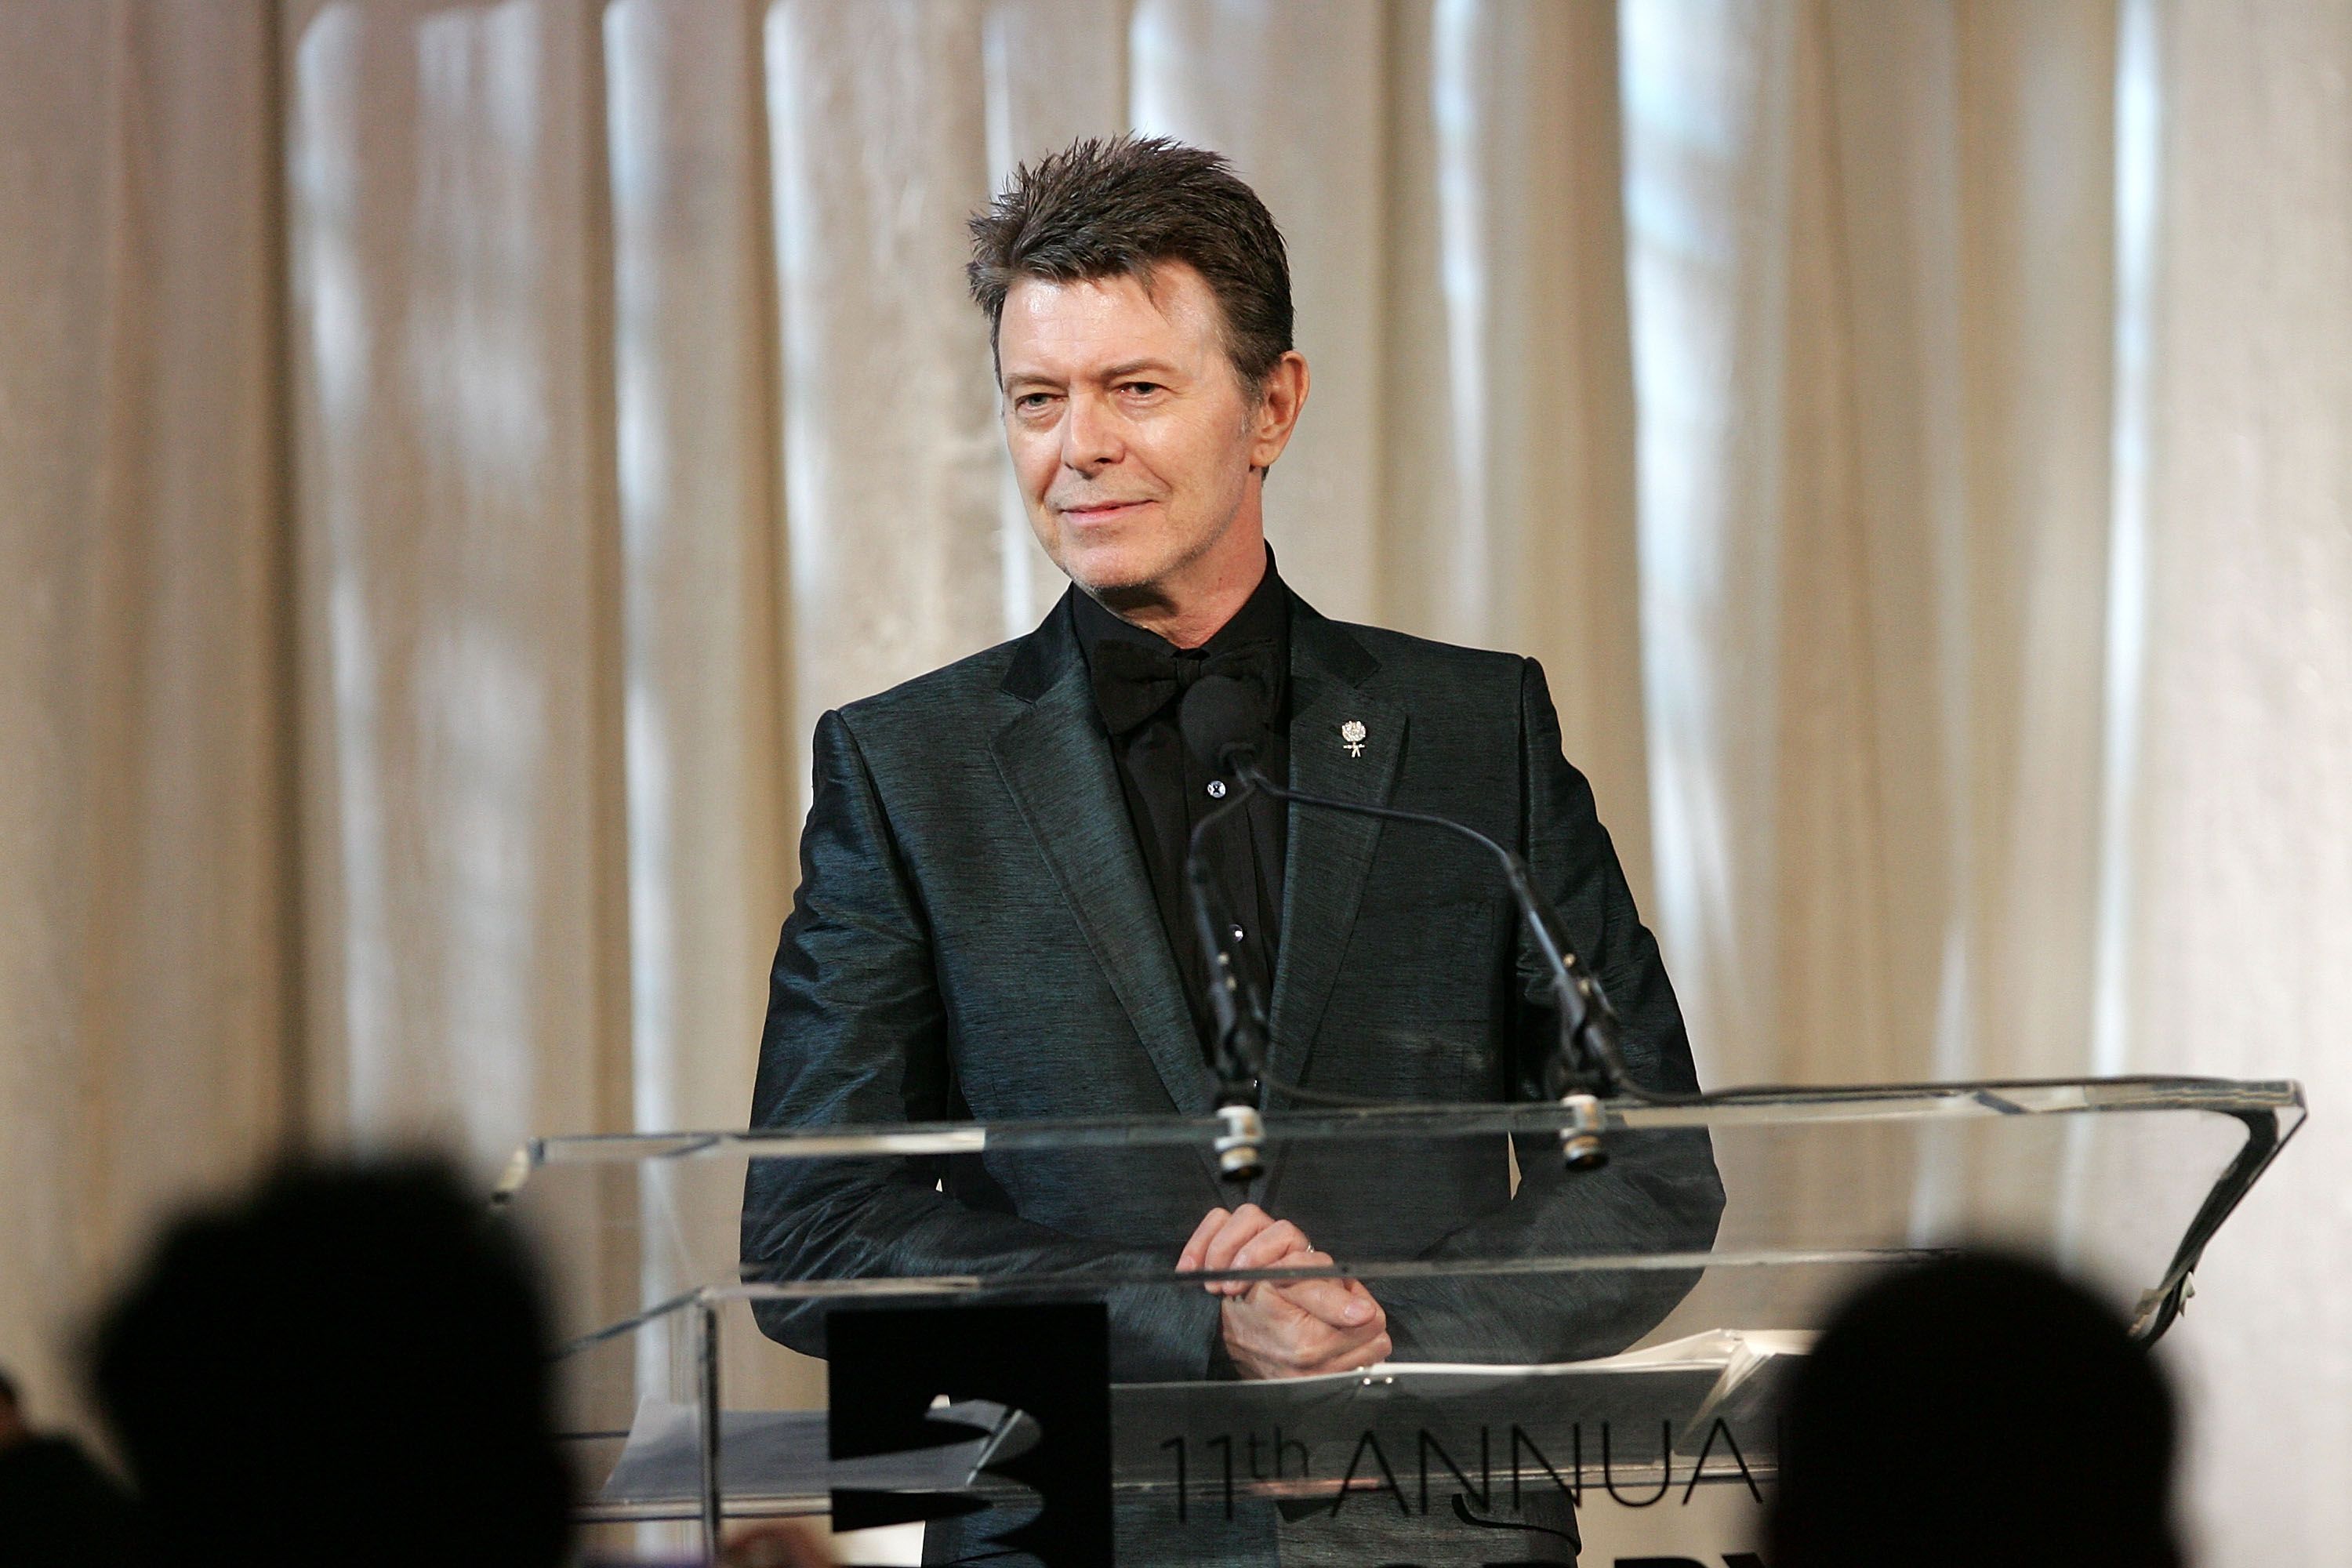 David Bowie accepting the Webby Lifetime Achievement award on June 5, 2007 in New York City. | Source: Getty Images